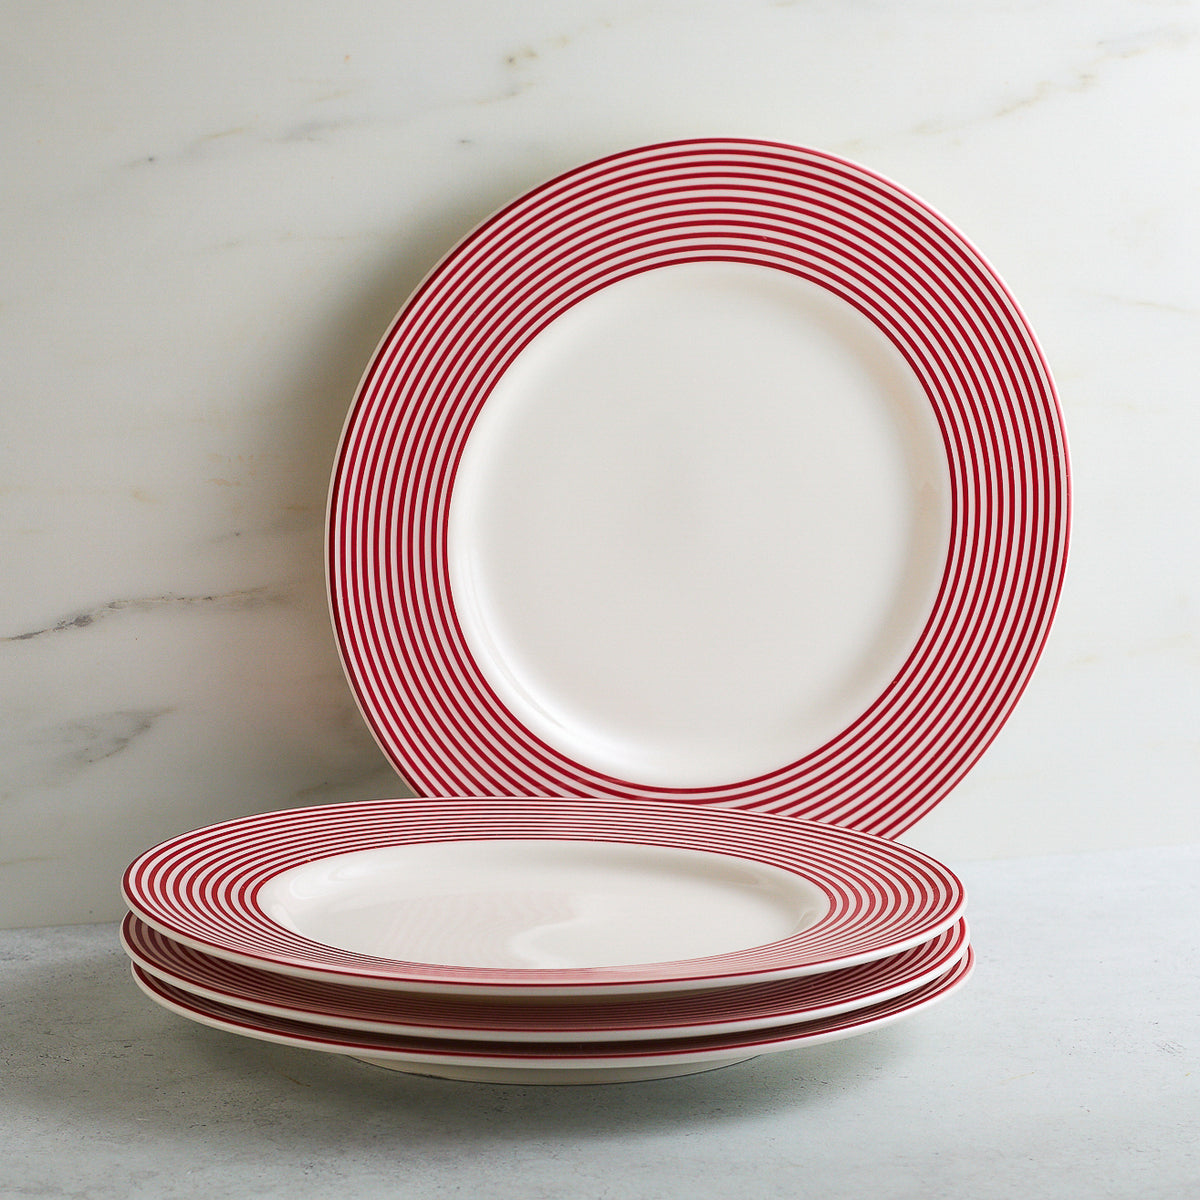 A stack of four Caskata Artisanal Home Newport Stripe Crimson Dinner Plates, showcasing white surfaces adorned with red concentric rings, is placed on a light-colored surface. An additional plate with the same design and casual elegance is propped upright behind the stack.